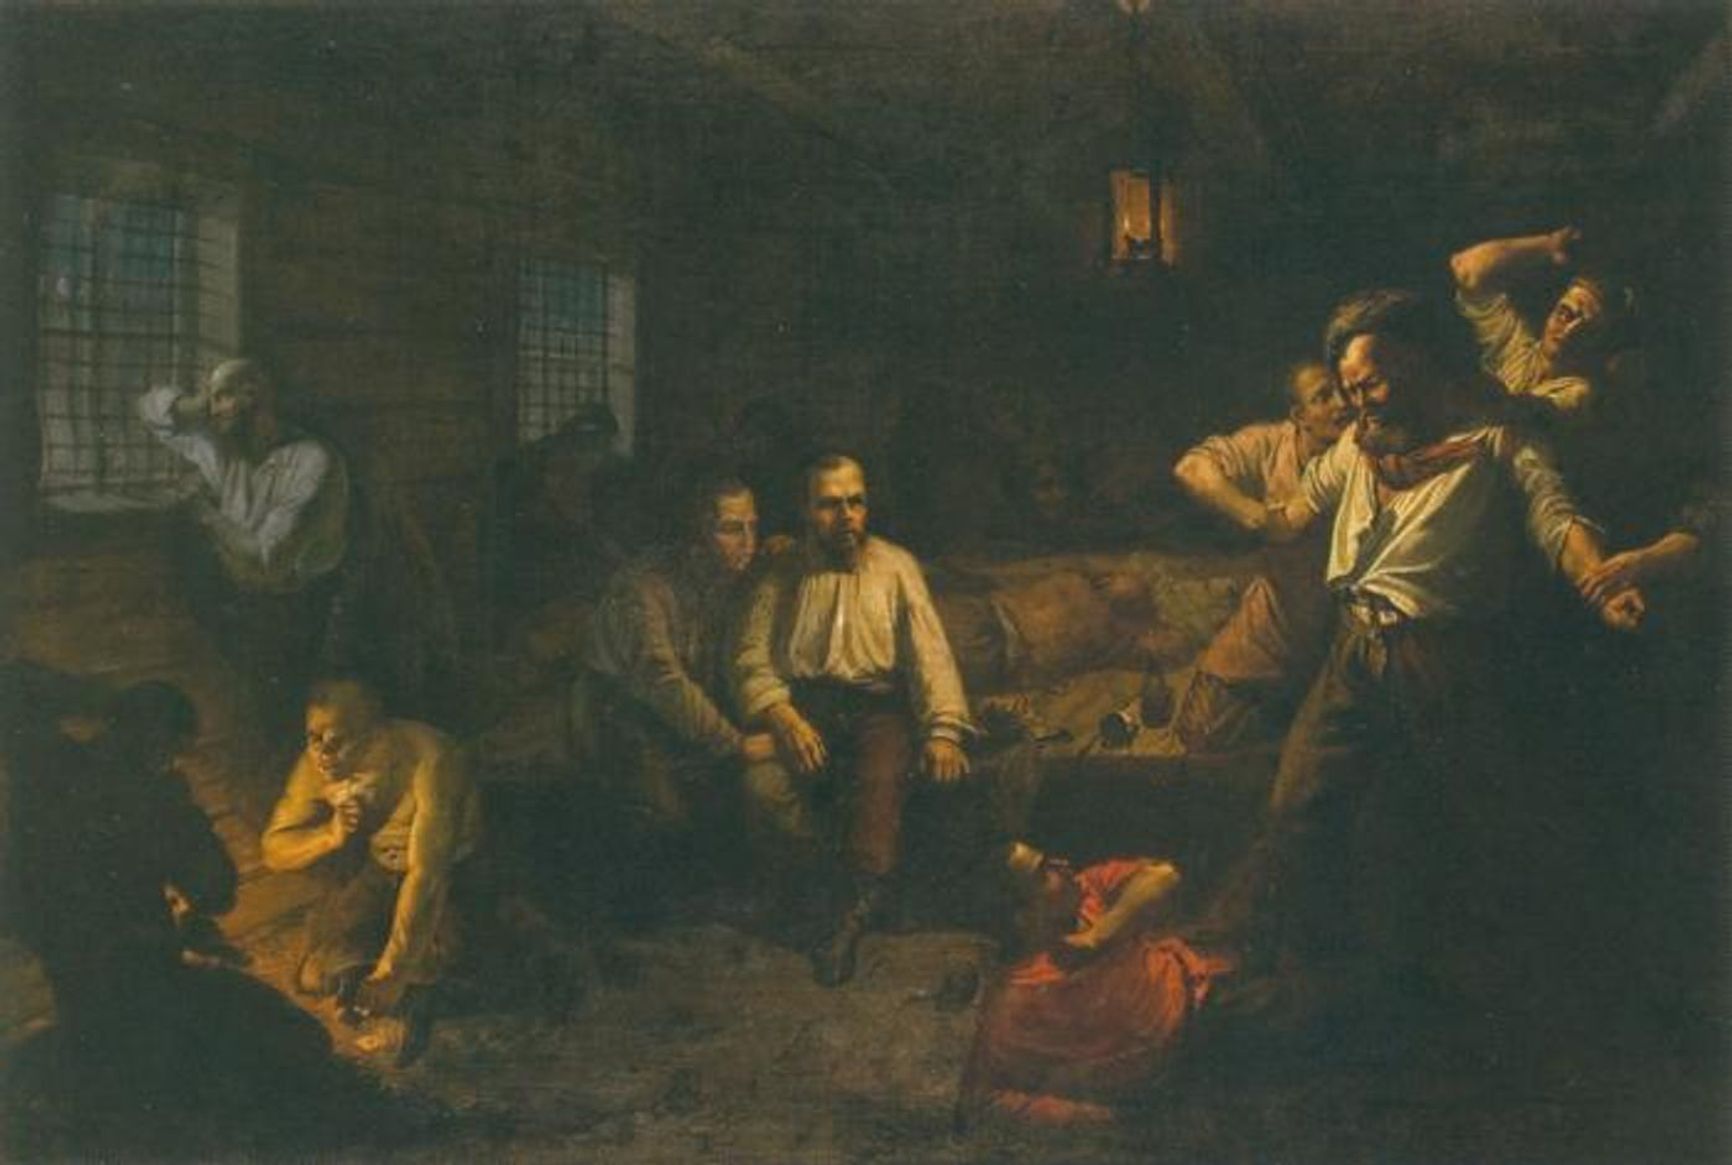 Dostoevsky in hard labor camp. K.P. Pomerantsev. The Feast of Christmas at the Dead House. 1862